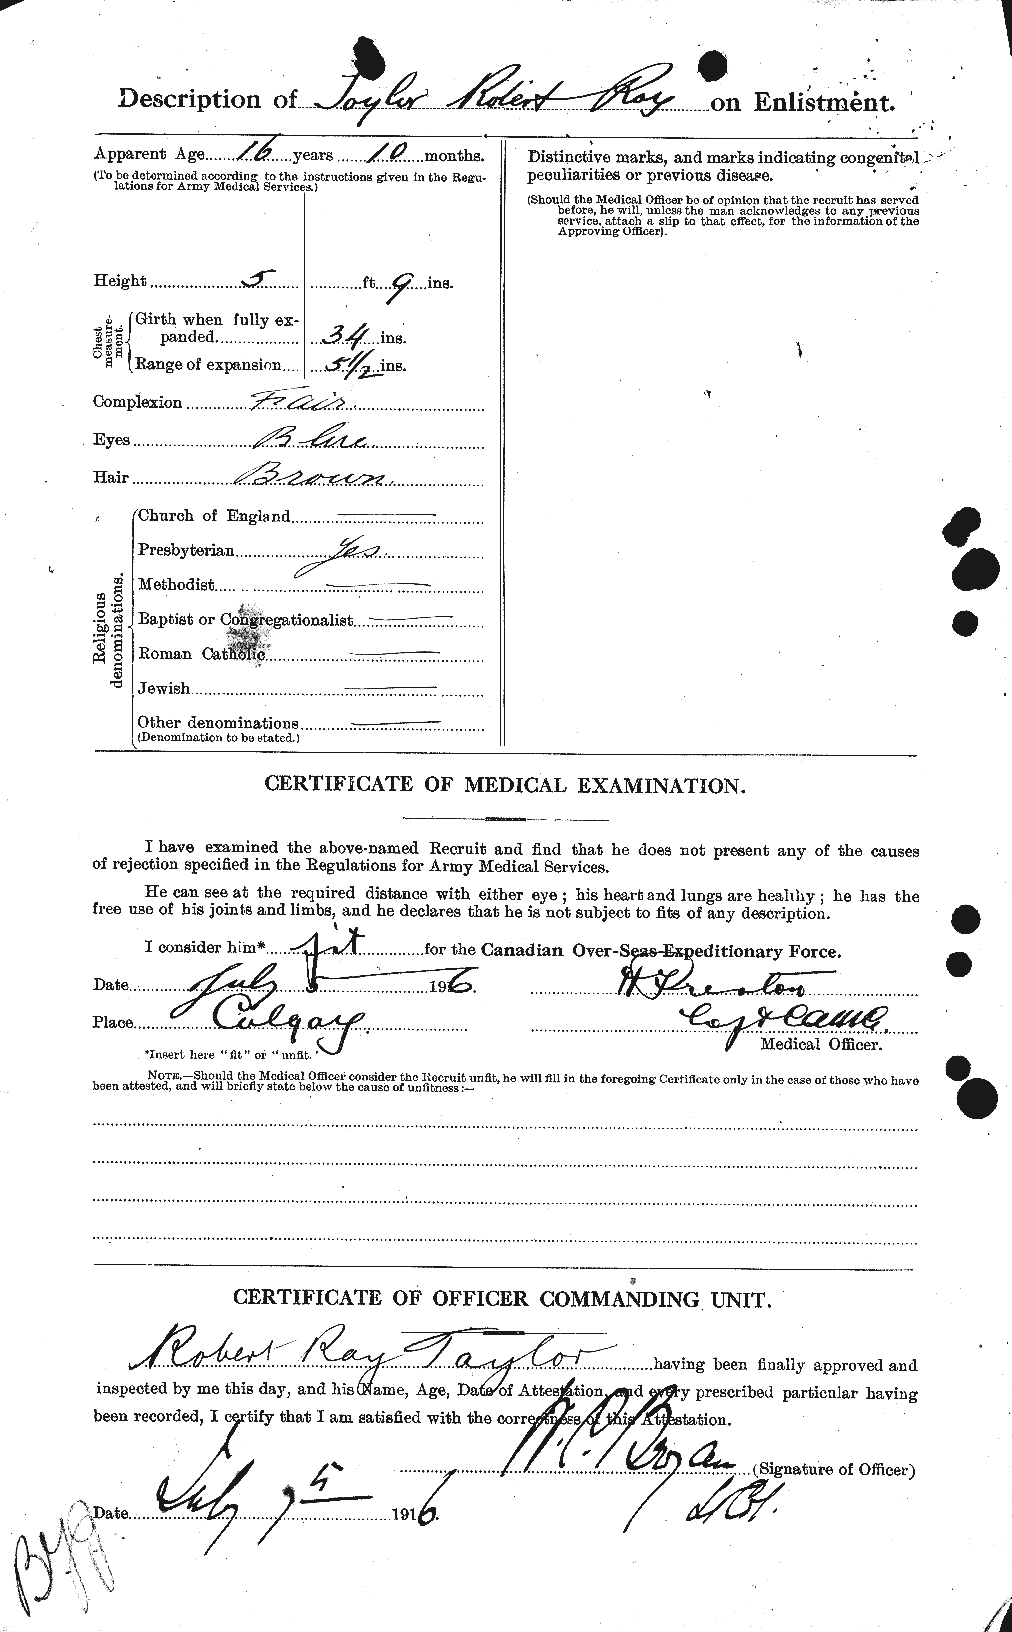 Personnel Records of the First World War - CEF 627496b